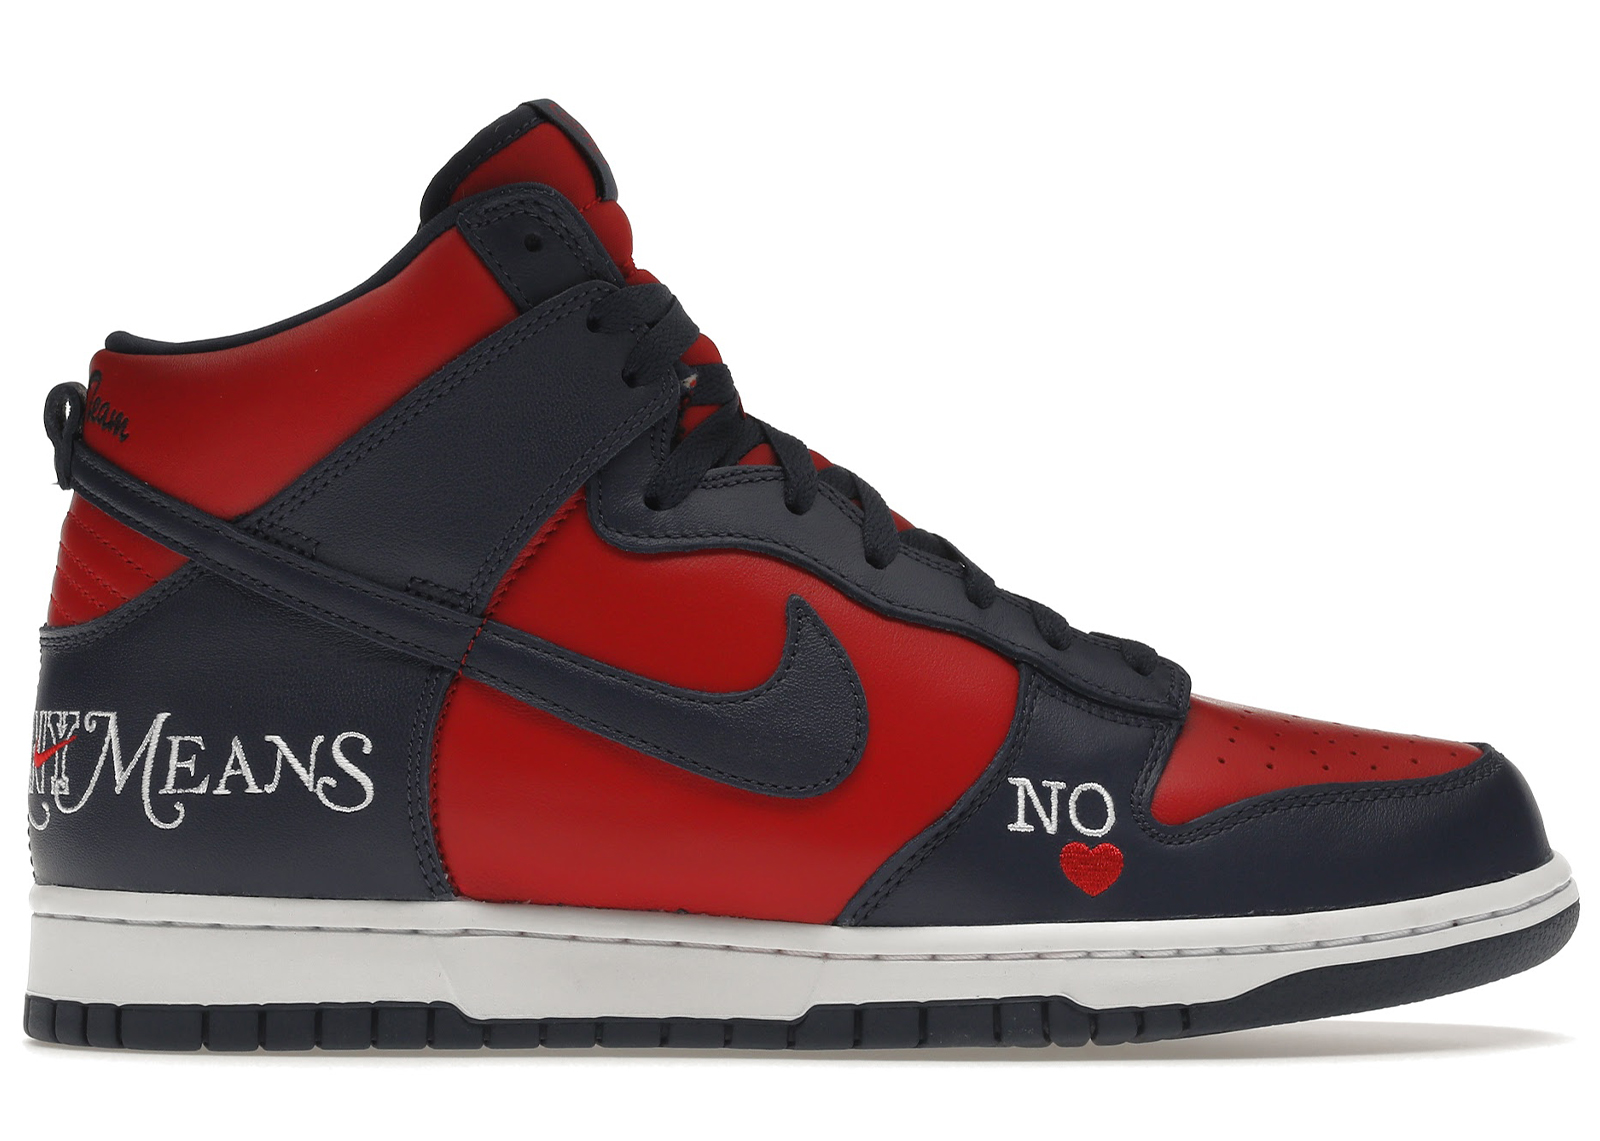 Nike SB Dunk High Supreme By Any Means Navy Men's - DN3741-600 - US